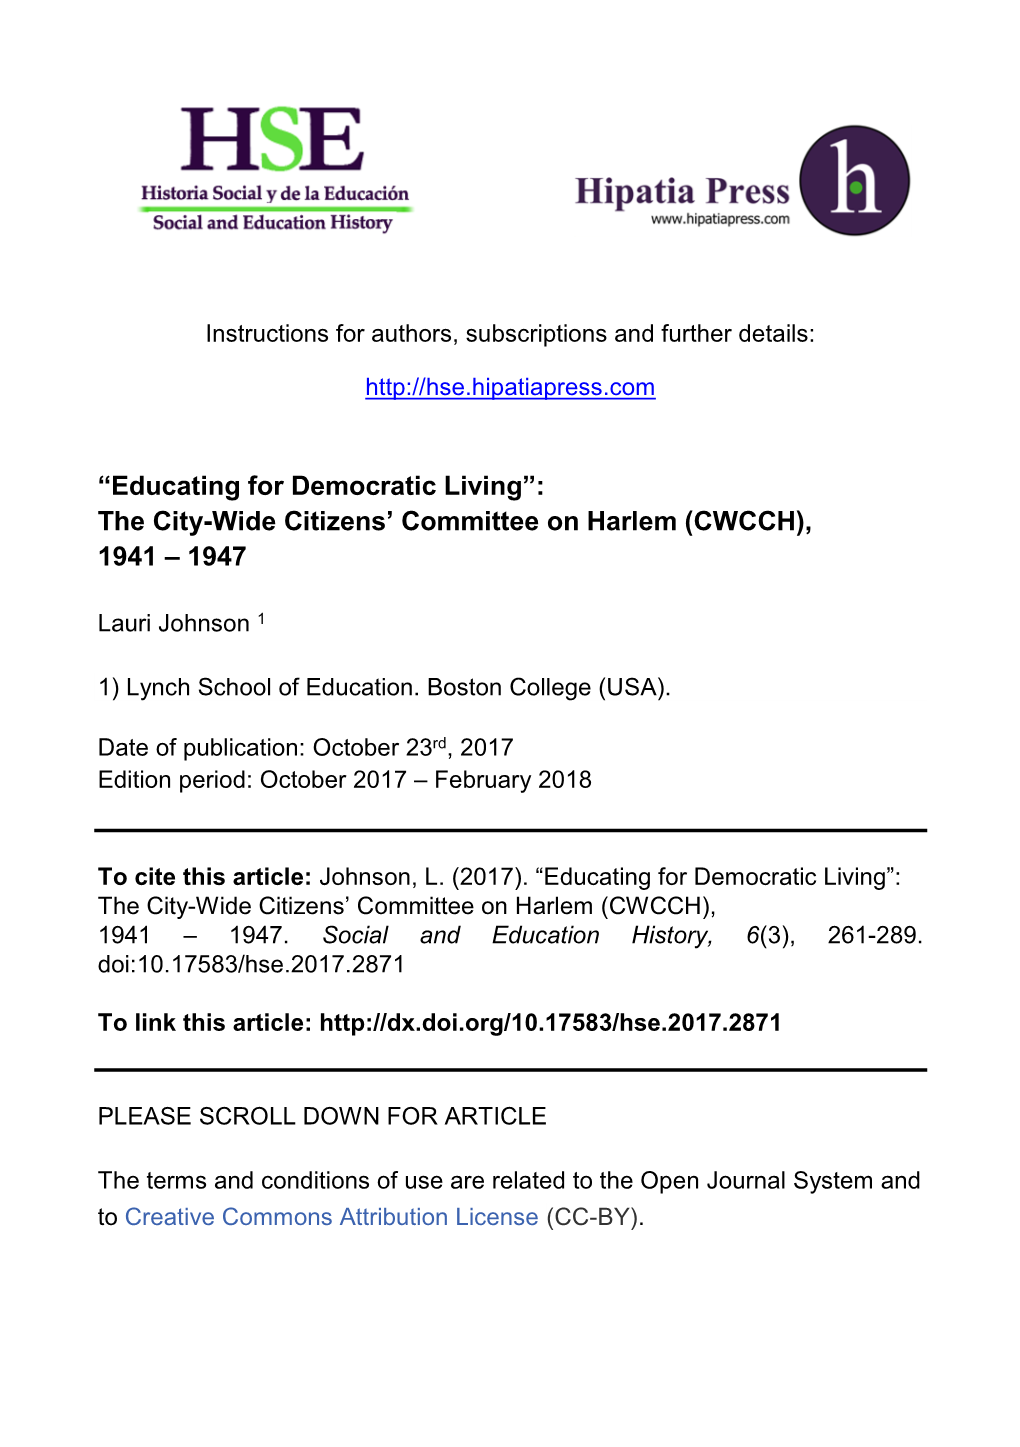 “Educating for Democratic Living”: the City-Wide Citizens' Committee on Harlem (CWCCH), 1941–1947